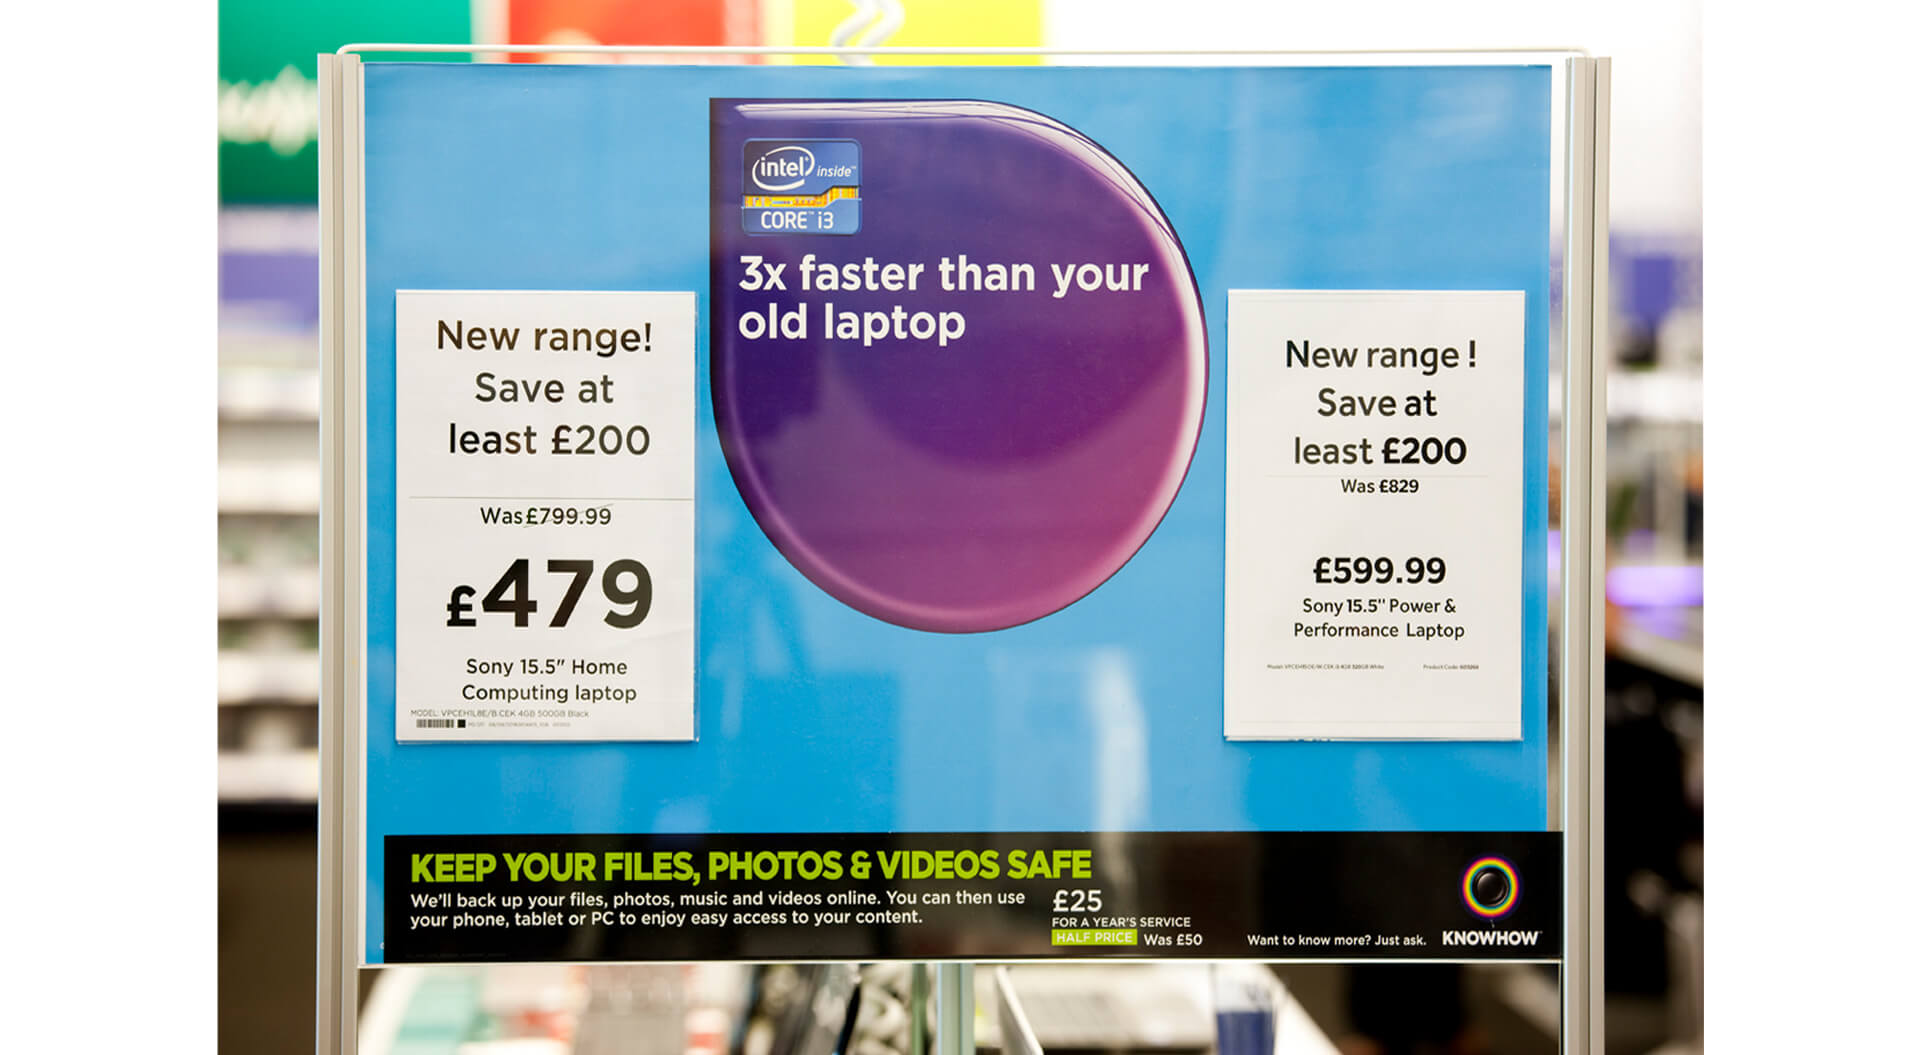 Currys PC World corporate in-store brand communications